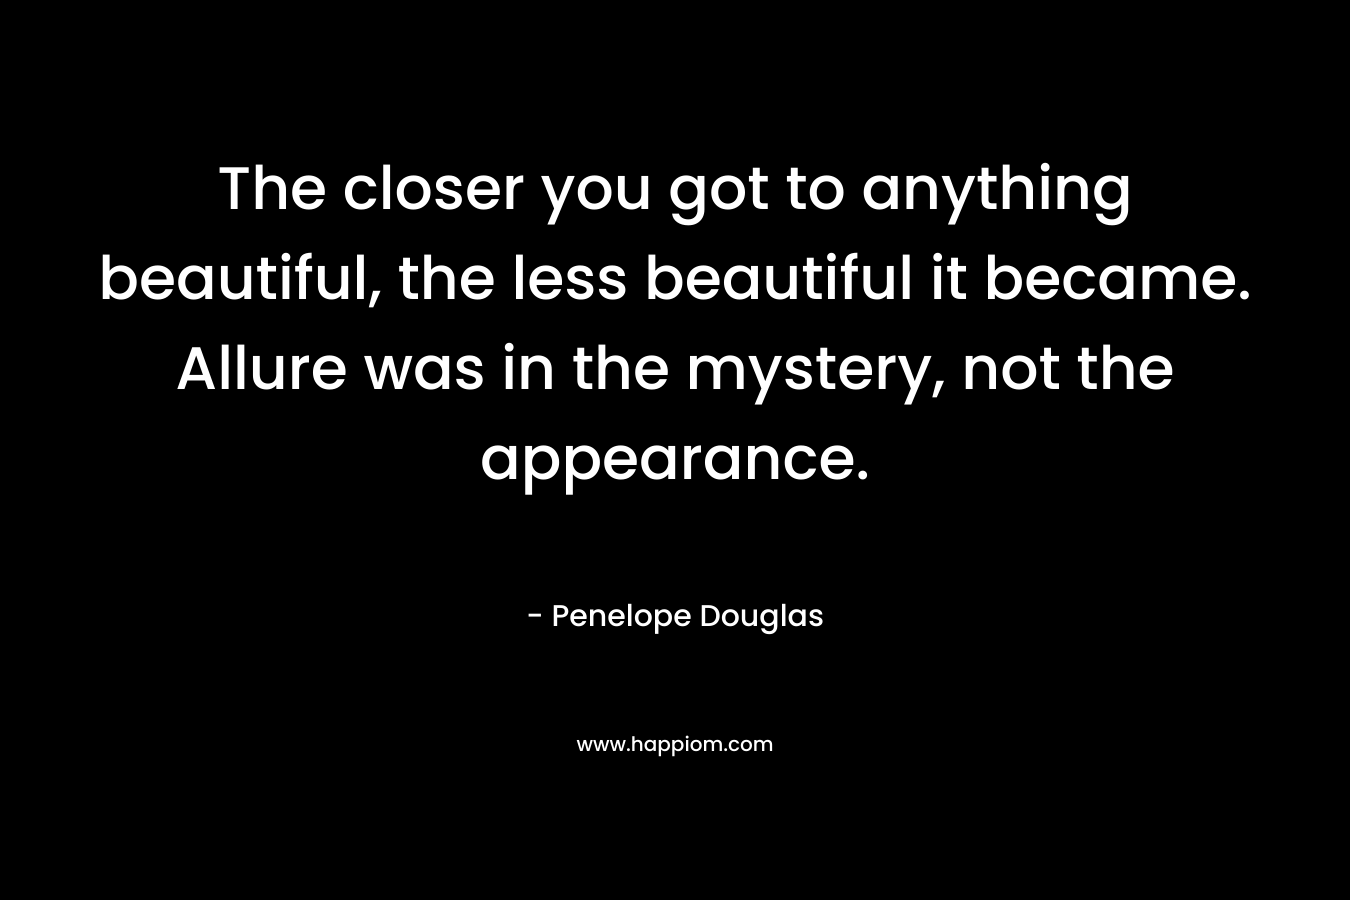 The closer you got to anything beautiful, the less beautiful it became. Allure was in the mystery, not the appearance. – Penelope Douglas